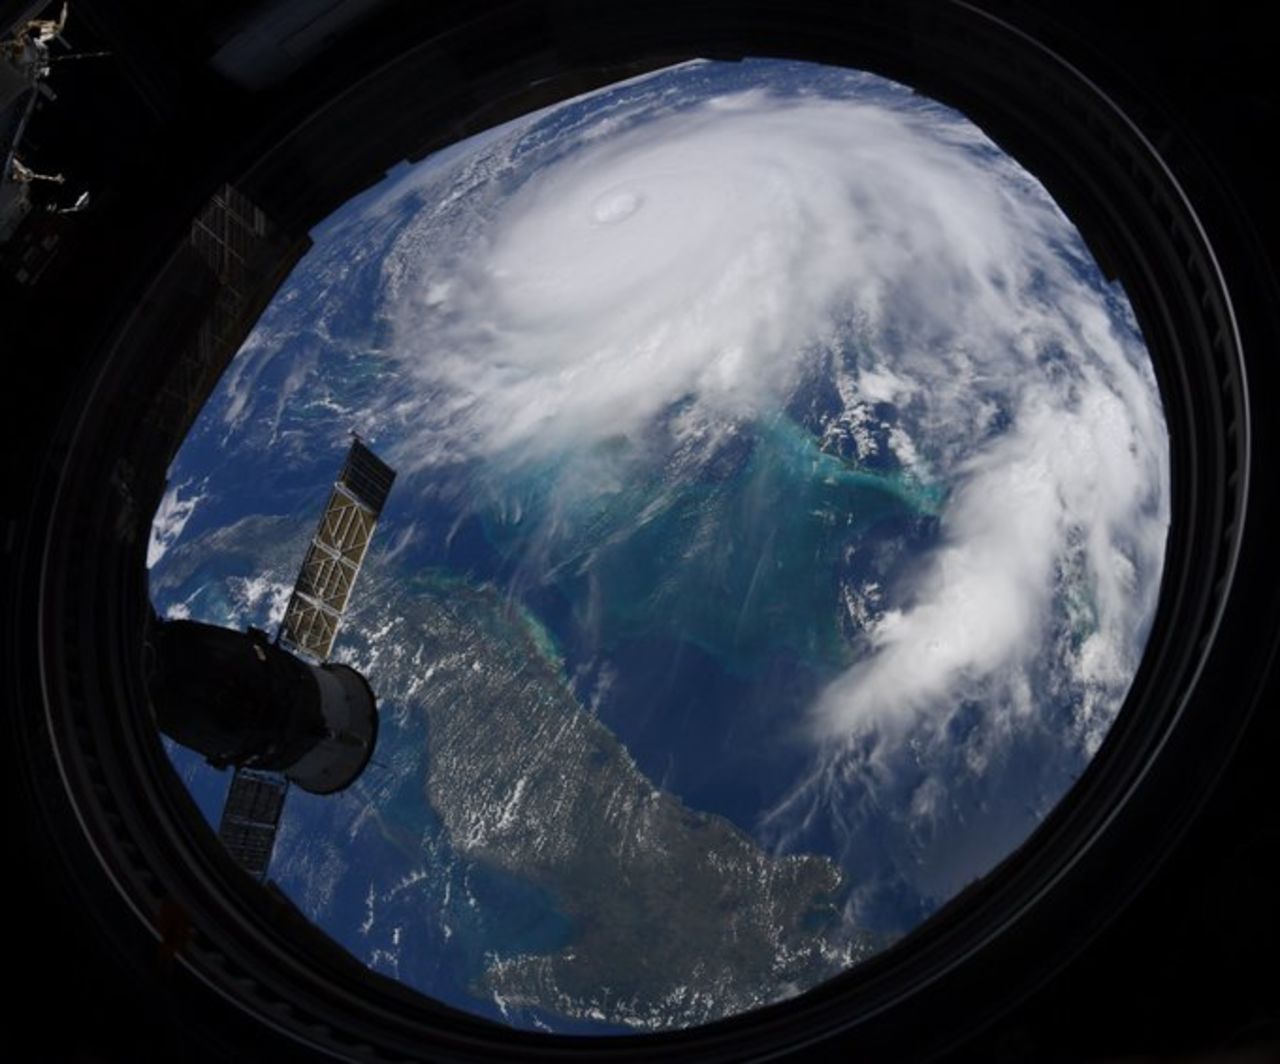 Photos of Hurricane Dorian from the International Space Station.